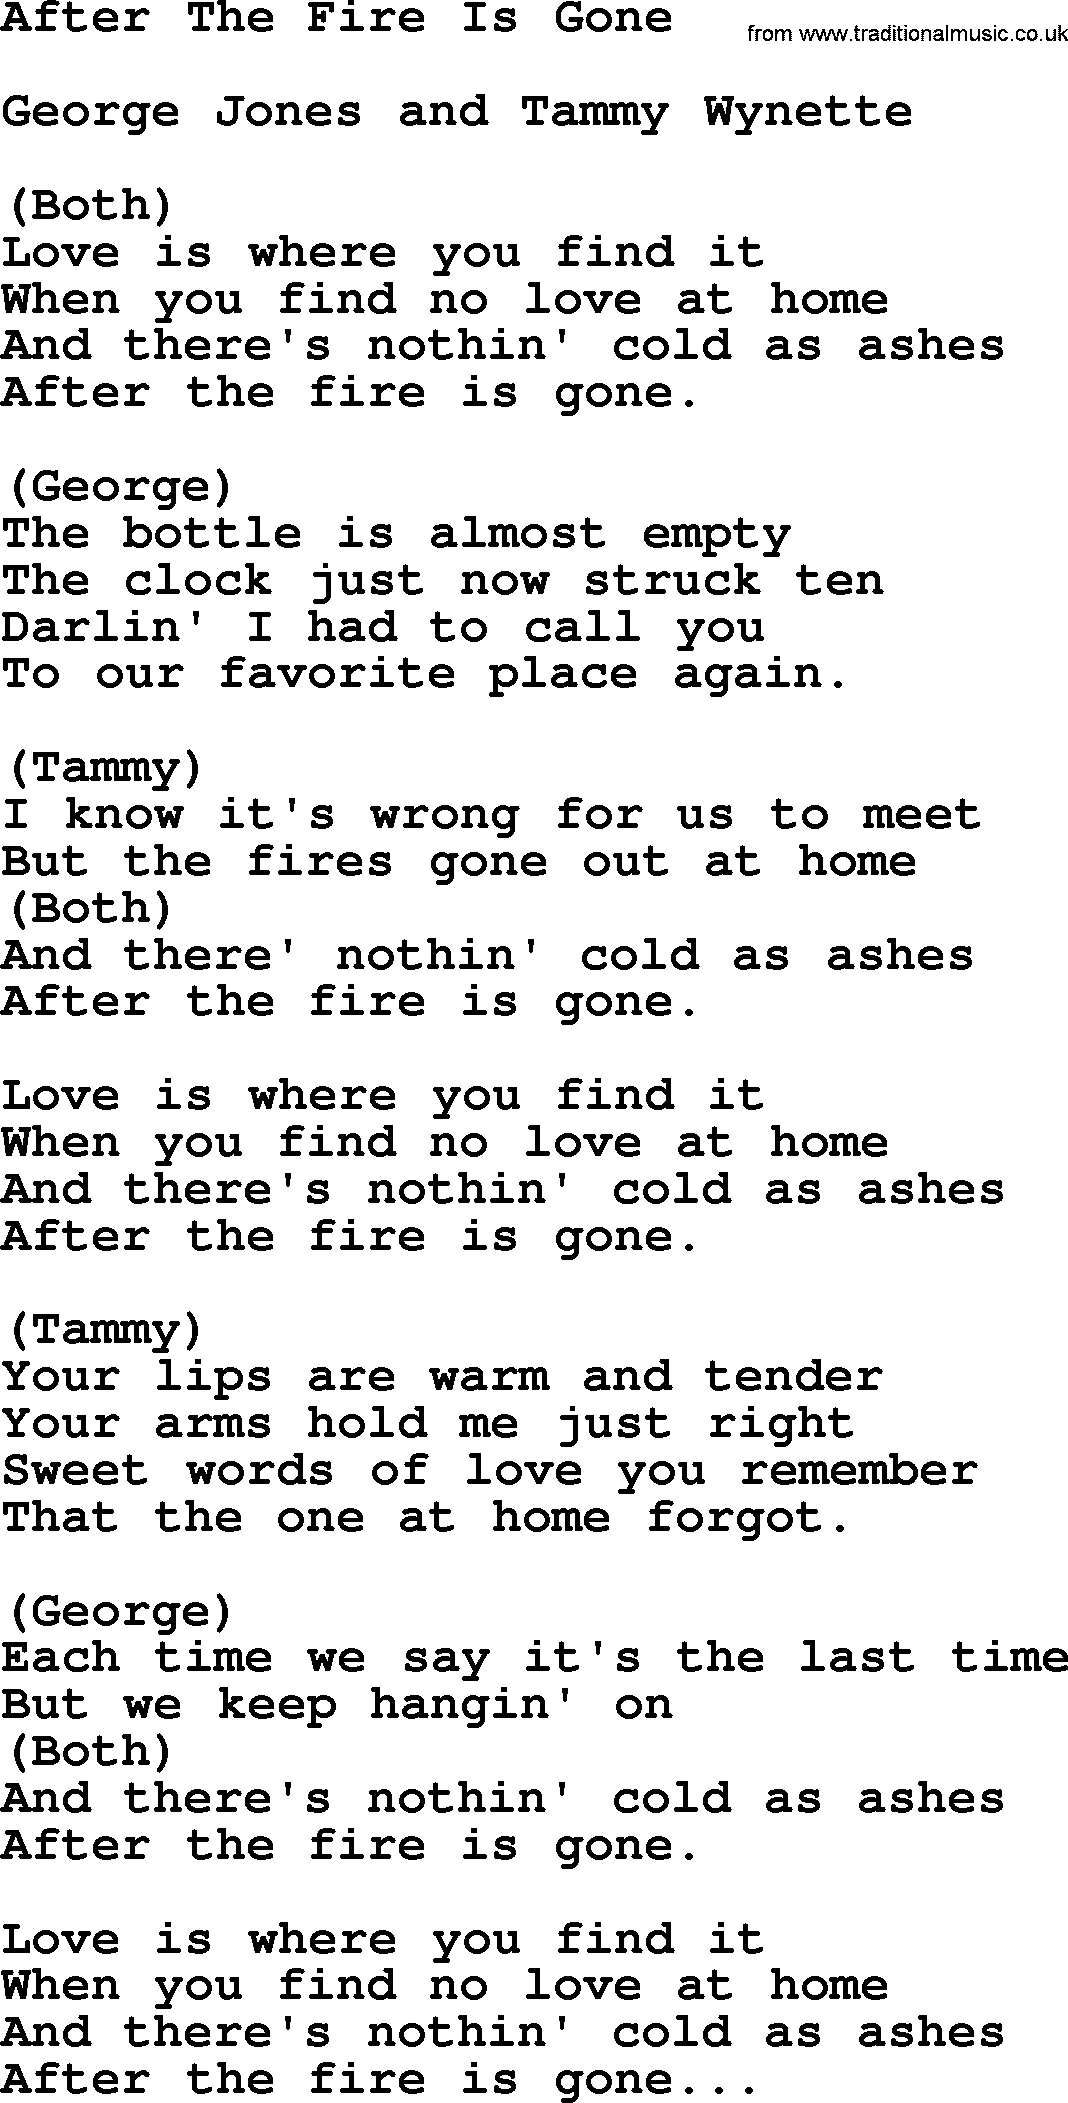 George Jones song: After The Fire Is Gone, lyrics